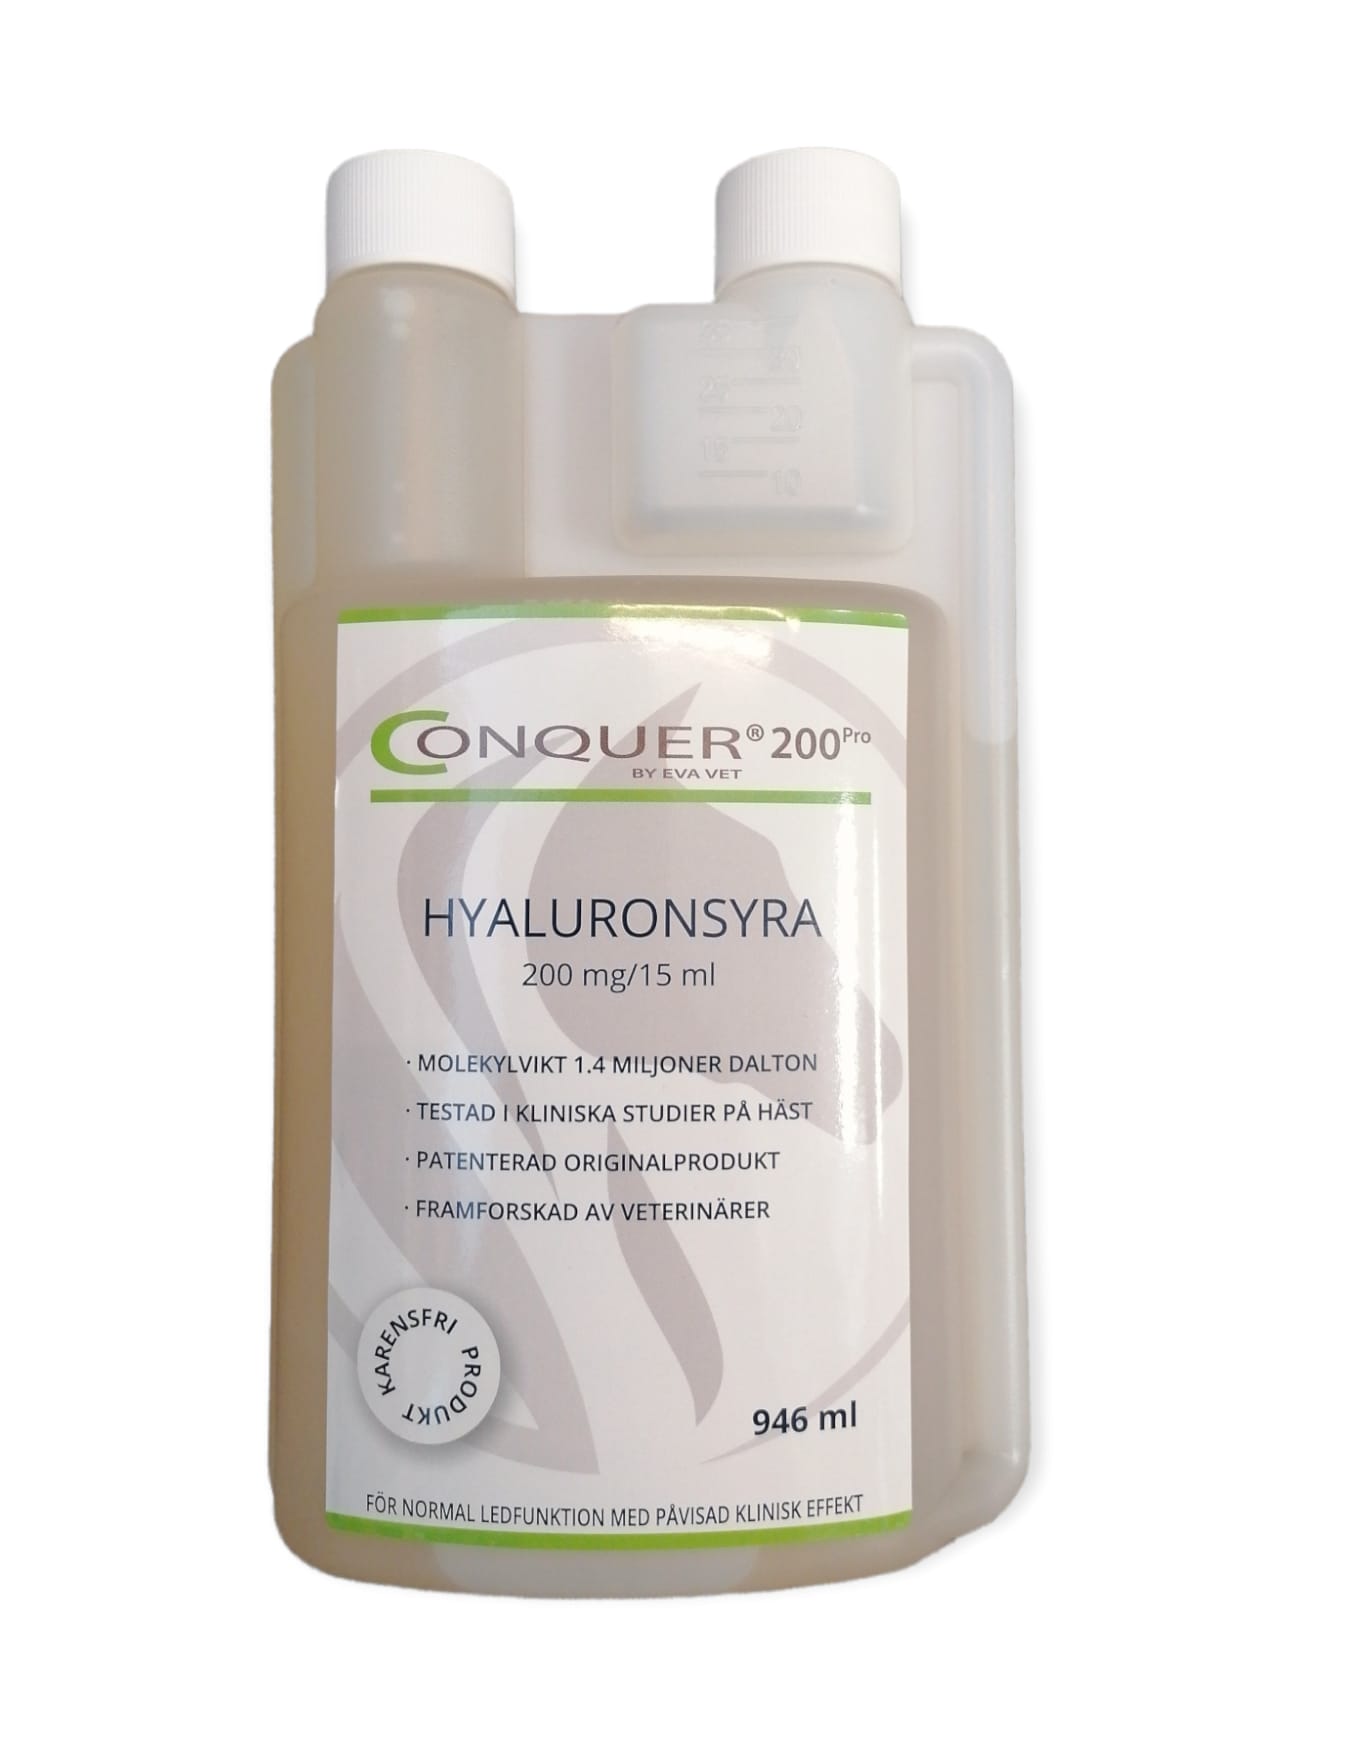 Conquer, hyaluronic acid - 946ml